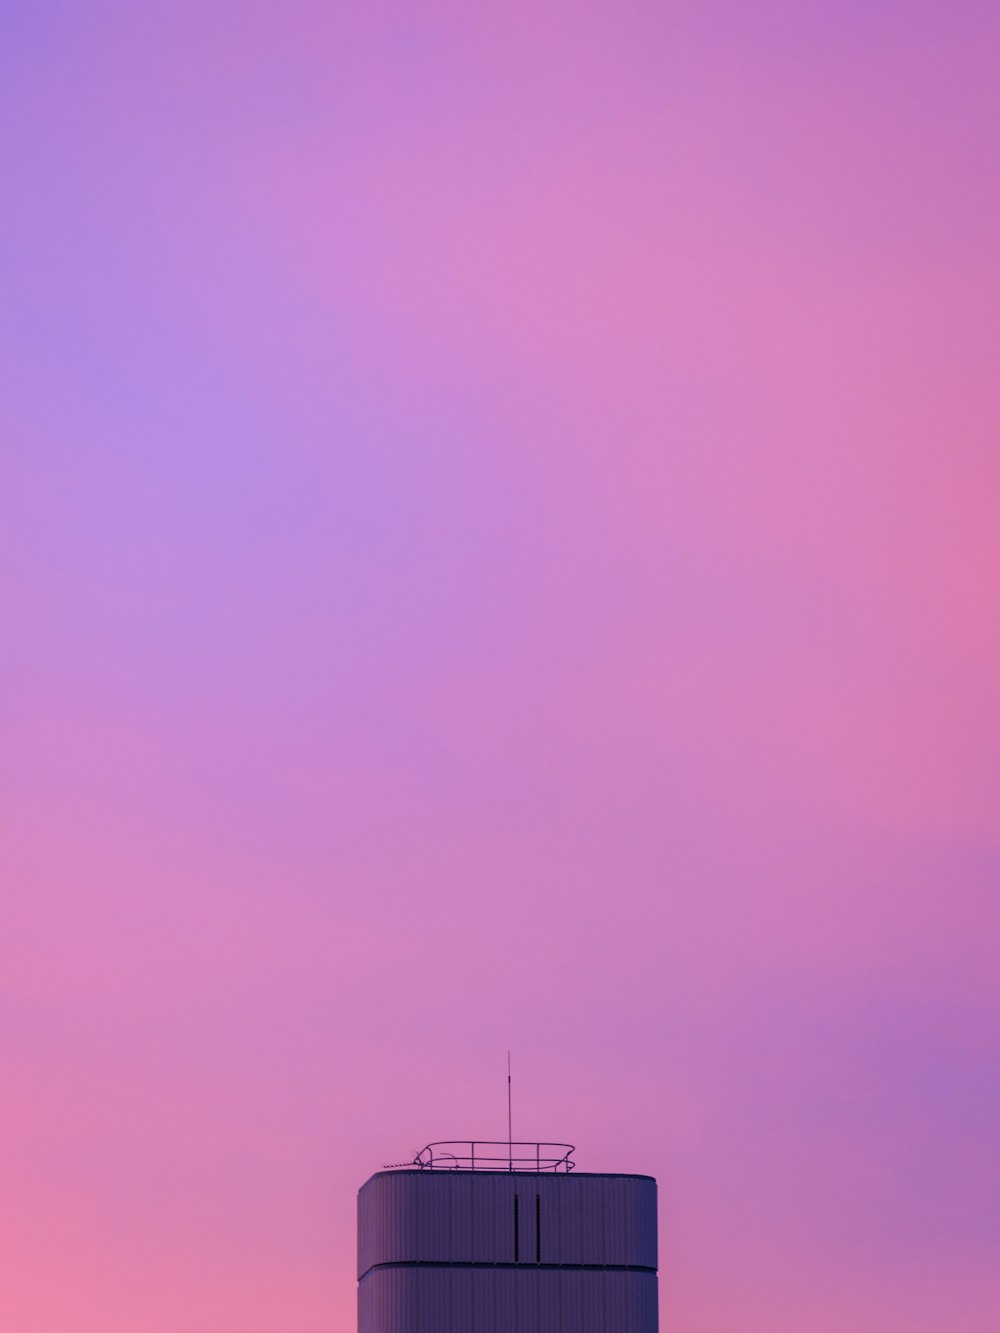 a water tower with a pink sky in the background